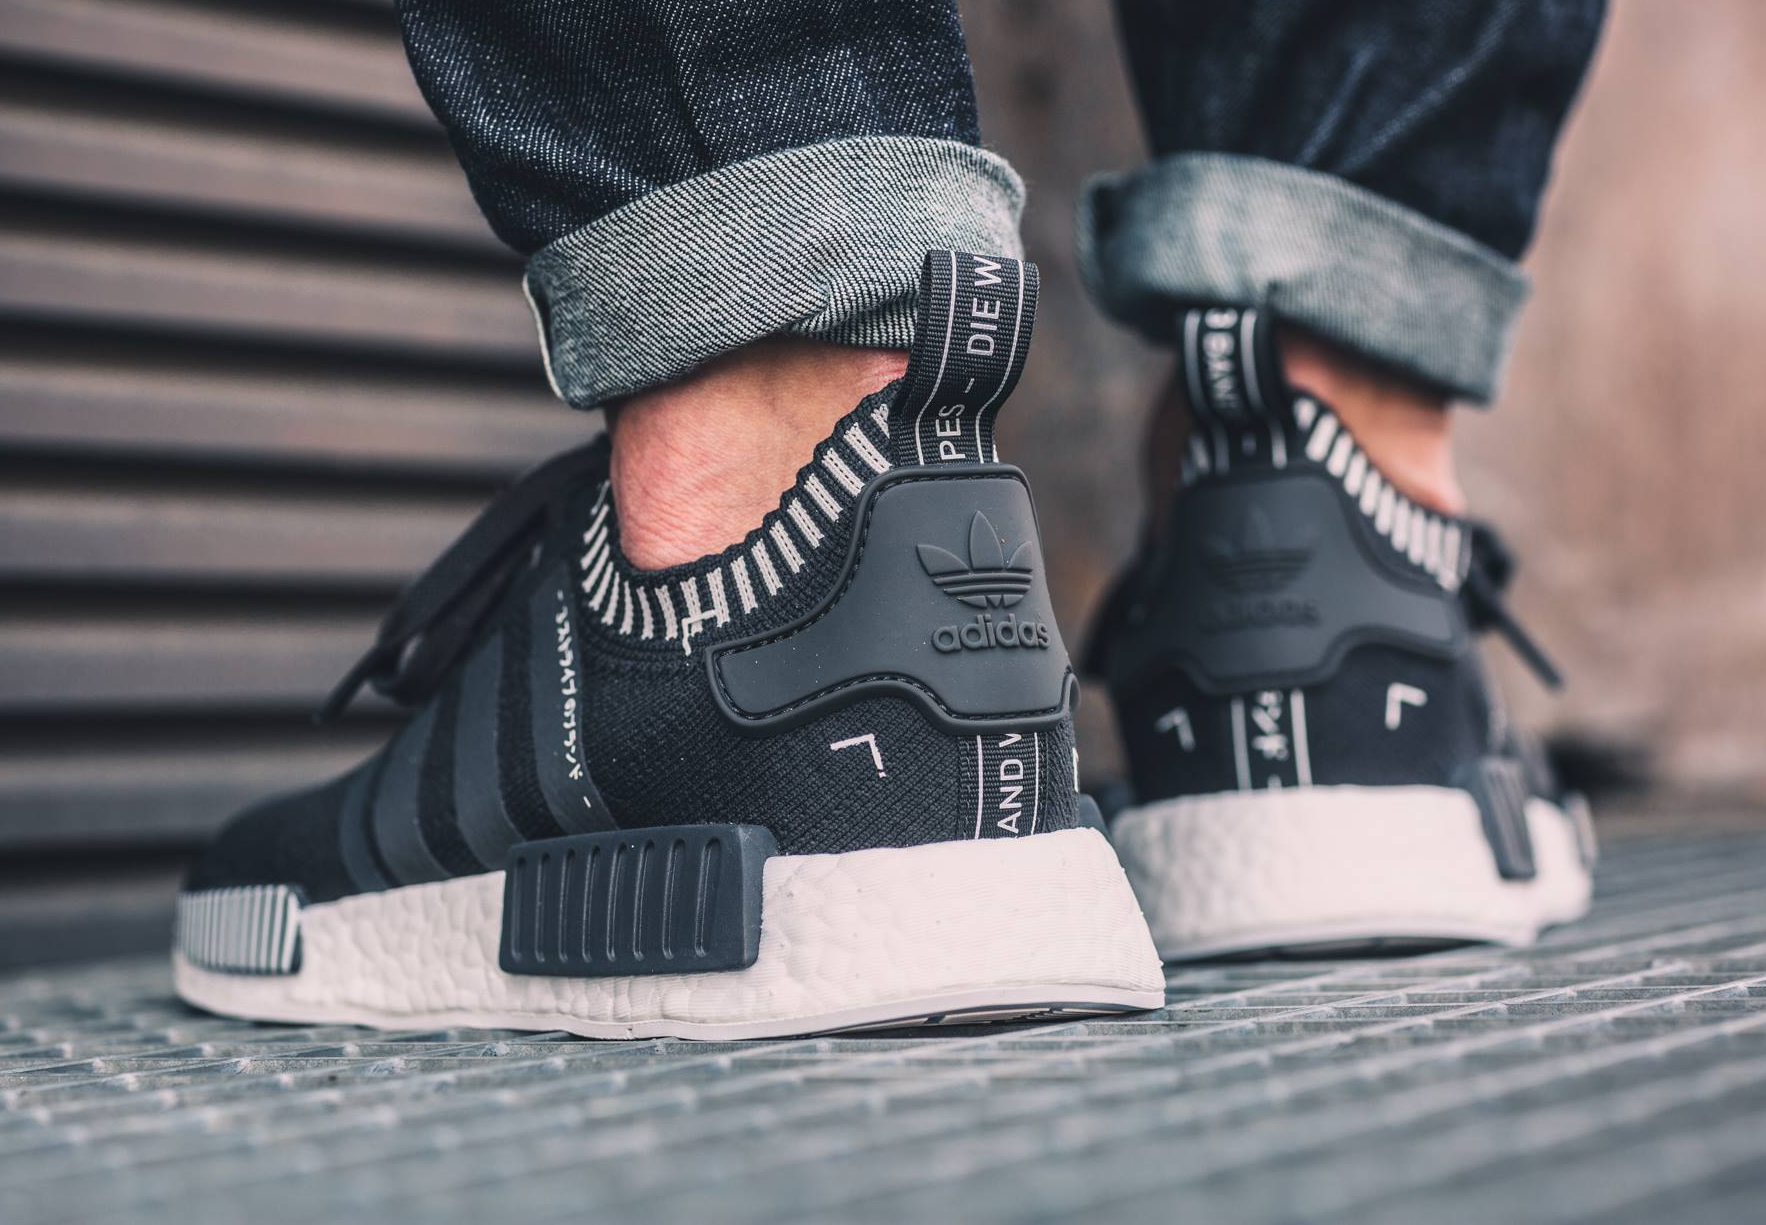 adidas nmd xr1 homme 2016